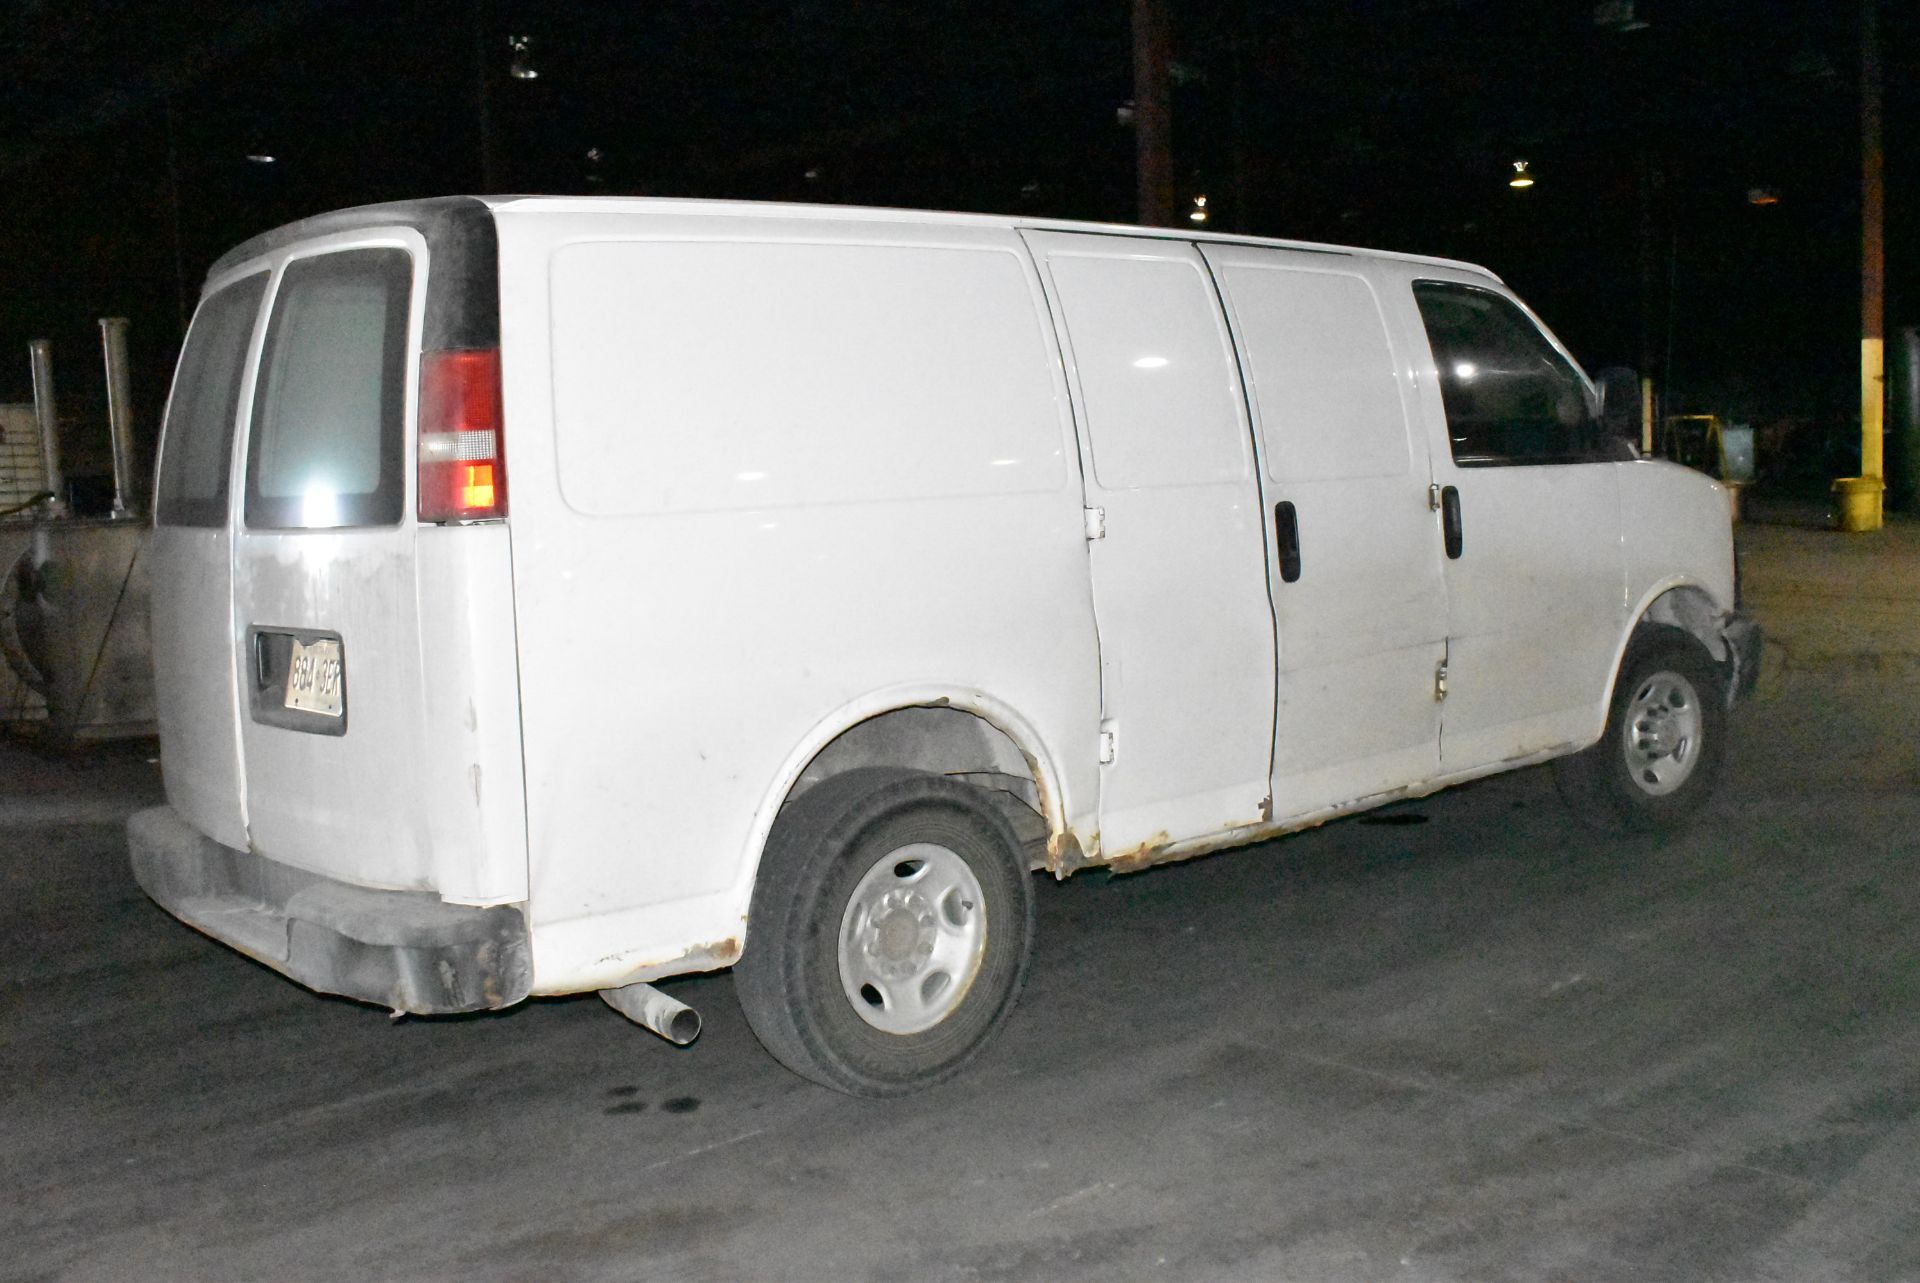 CHEVROLET (2008) EXPRESS 2500 CARGO VAN WITH 4.8 LITER V8 GAS ENGINE, AUTO, RWD, APPROX 556,000 KM - Image 4 of 12